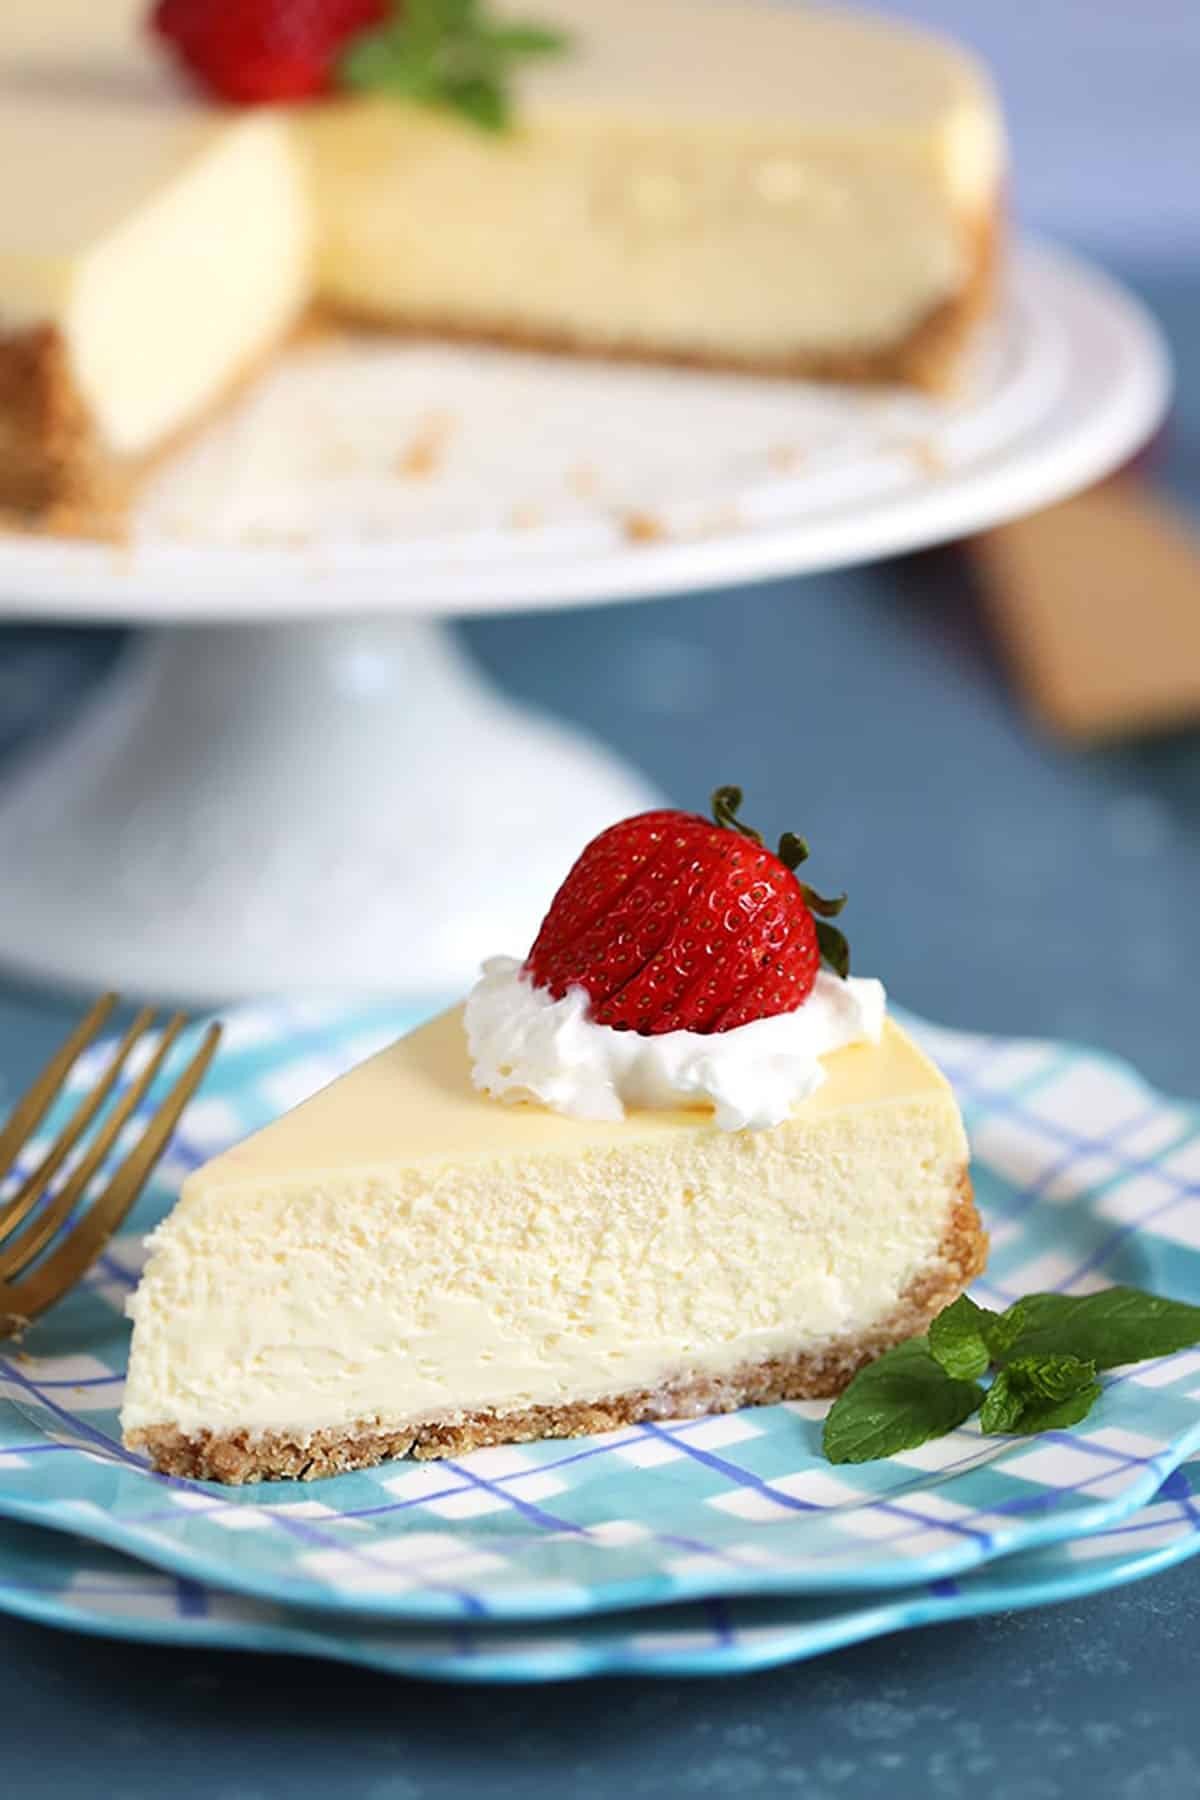 A slice of New York Cheesecake on a blue plaid plate with a strawberry and whipped cream on top and a sprig of mint.